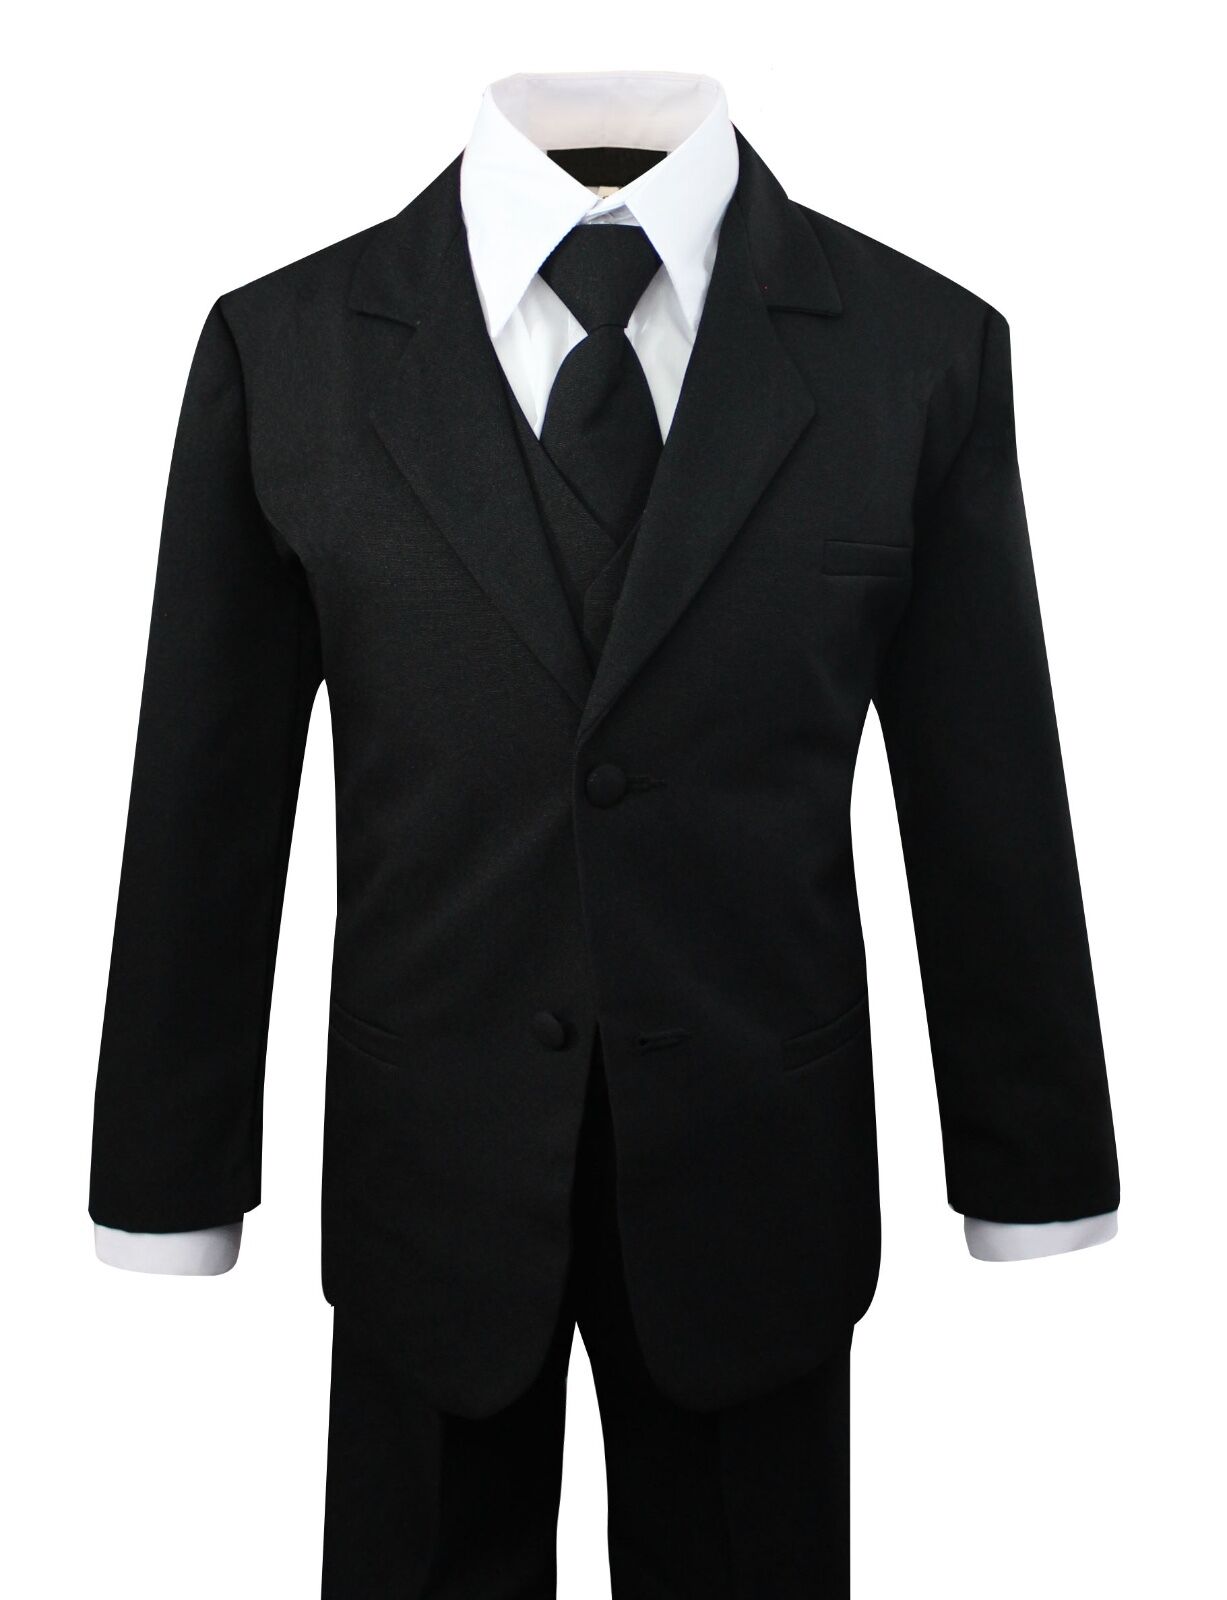 Boys Formal Black Suit 5 Pieces Set Toddler Size 2T to 14 Без бренда